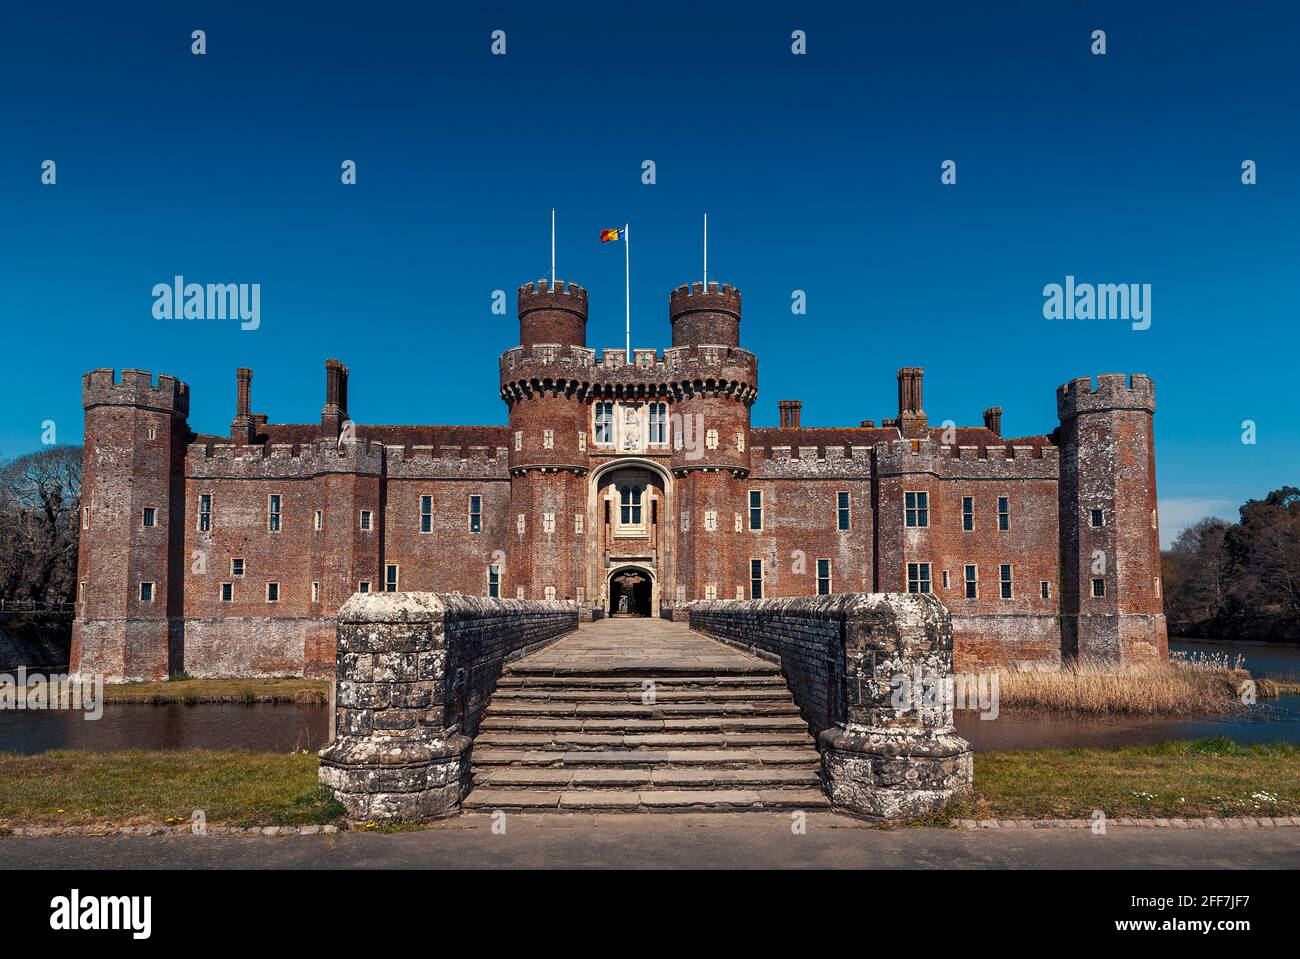 Herstmonceux Castle, East Sussex, UK. One of the oldest significant brick buildings still standing in England. Flying Queen's University (Canada) Flag Stock Photo